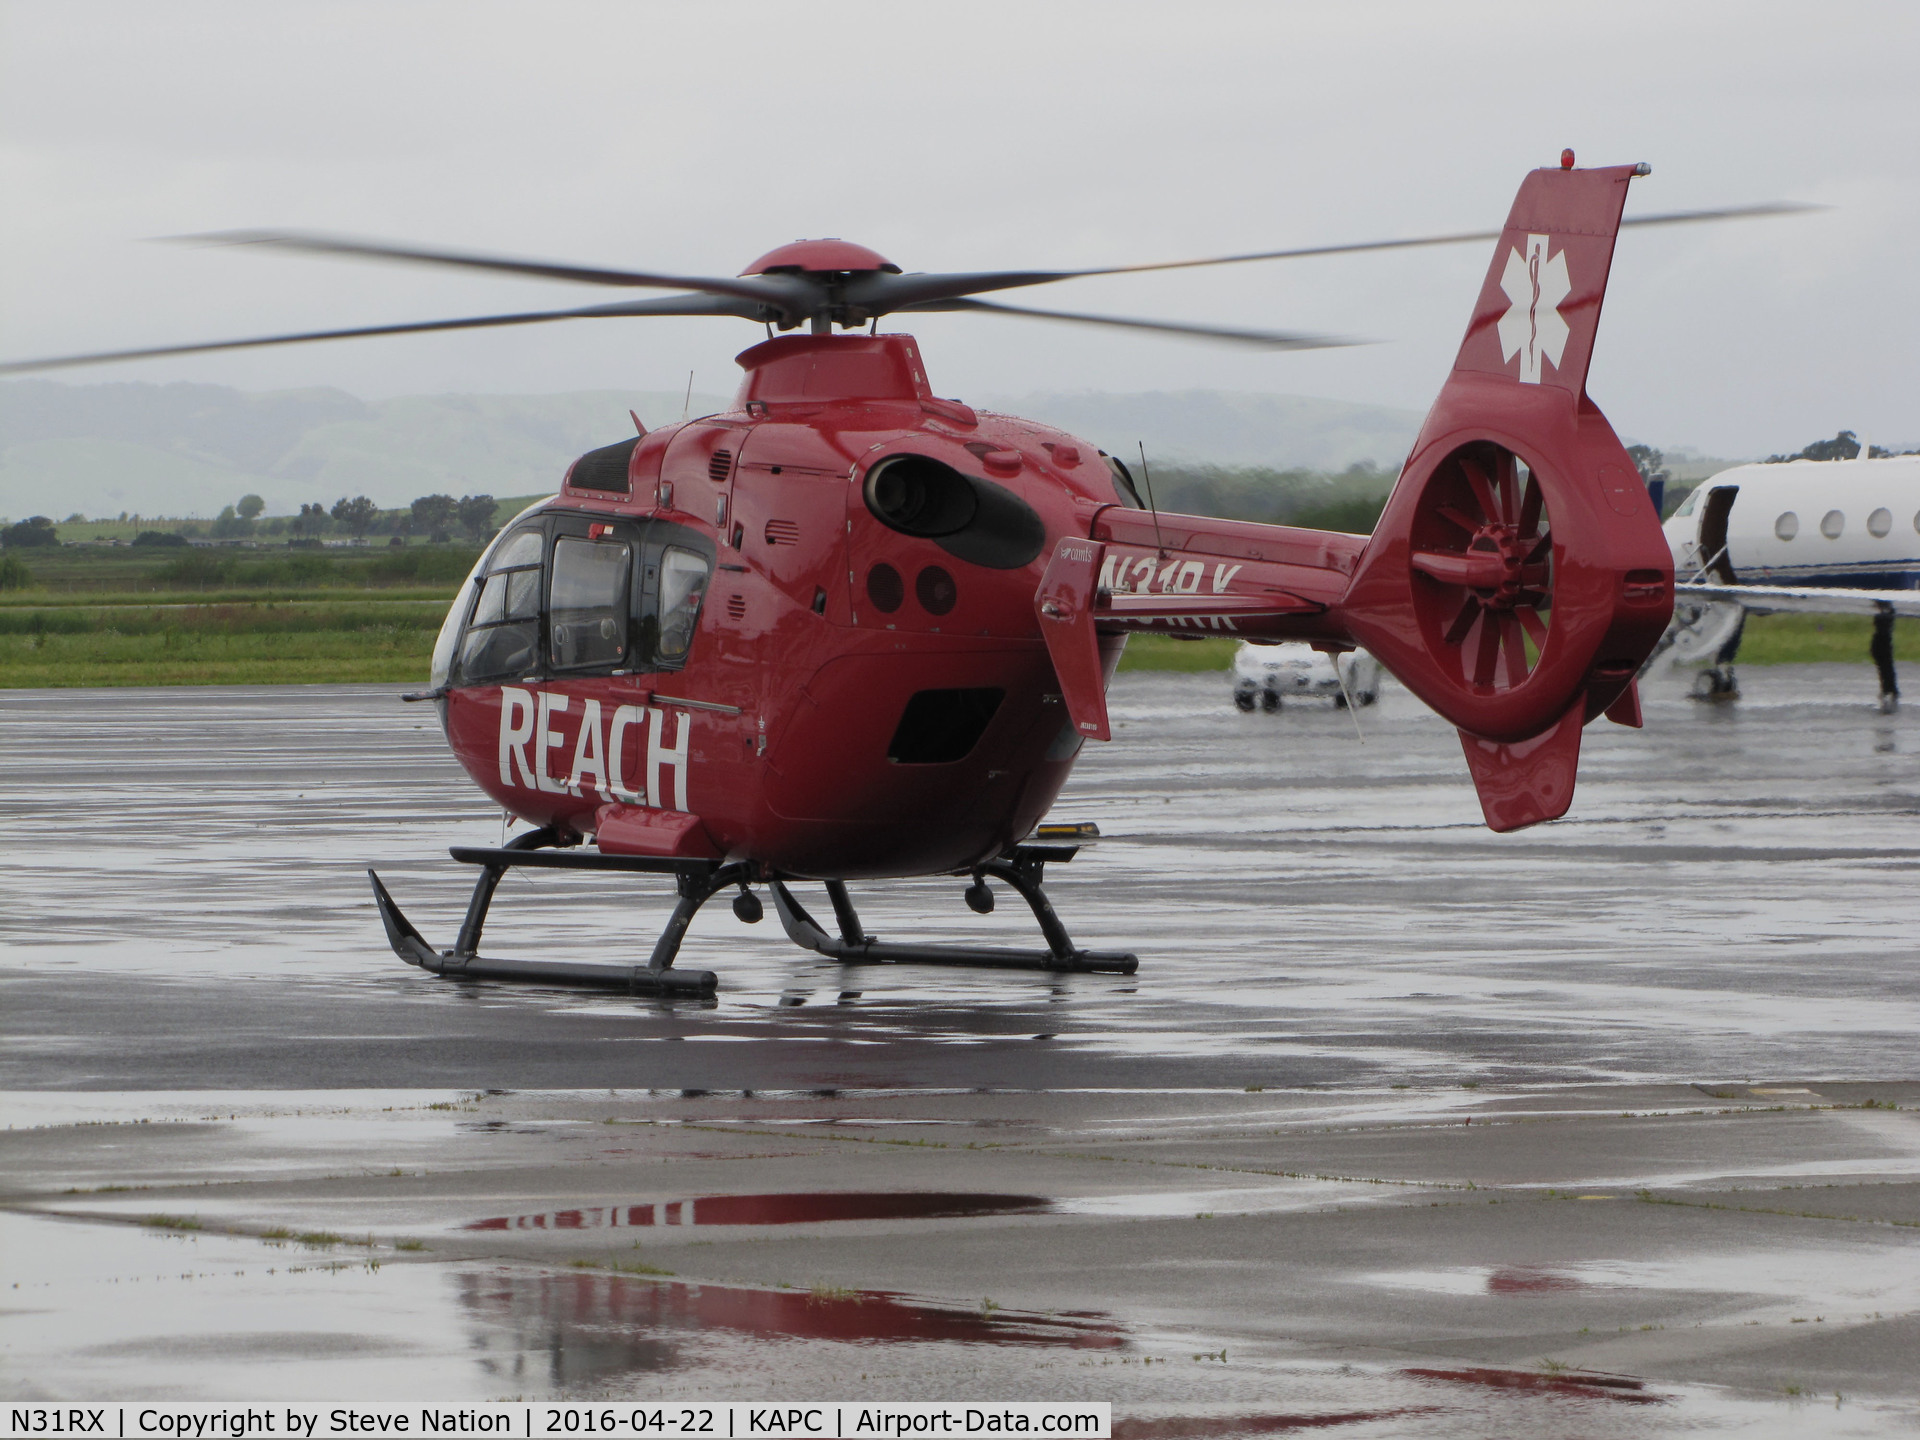 N31RX, 2012 Eurocopter EC-135P2+ C/N 1087, REACH/Mediplane (Santa Rosa, CA) 2012 Eurocopter EC-135P2+ waiting for ambulance to pickup and transport patient on rainy ramp @ Napa County Airport, CA